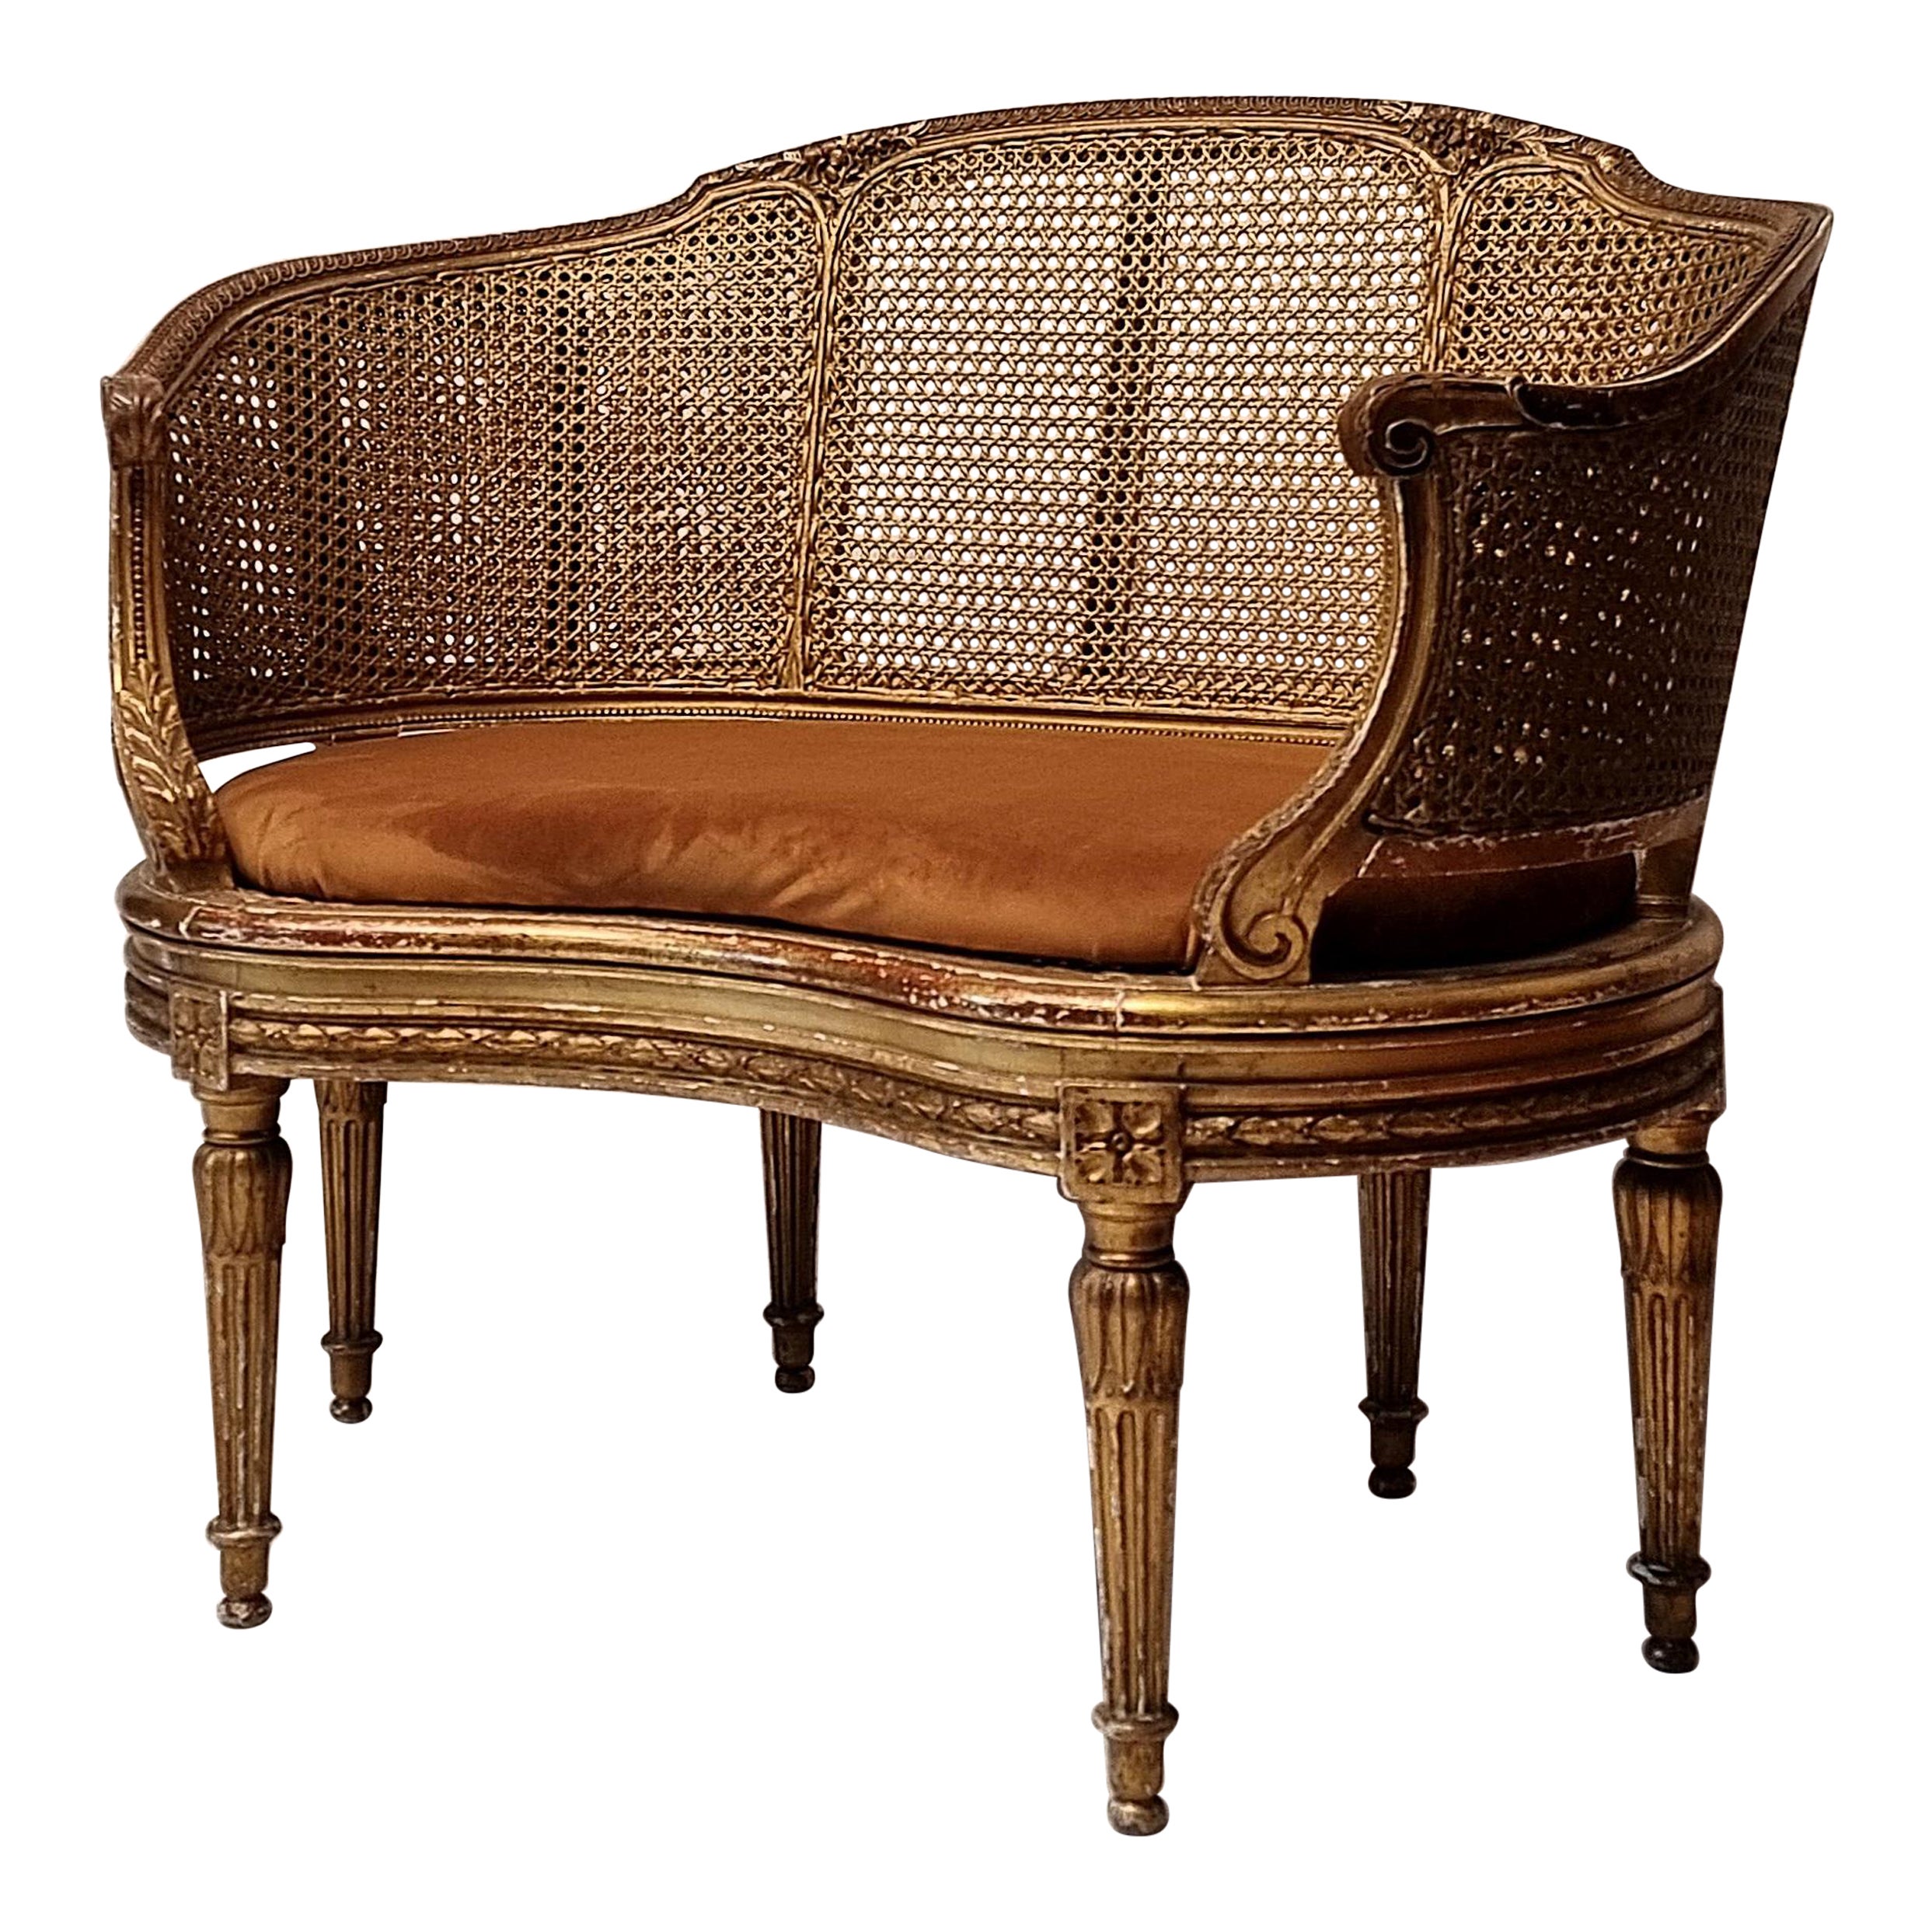 Small Louis XVI Style Sofa - Caning & Golden Wood - 19th